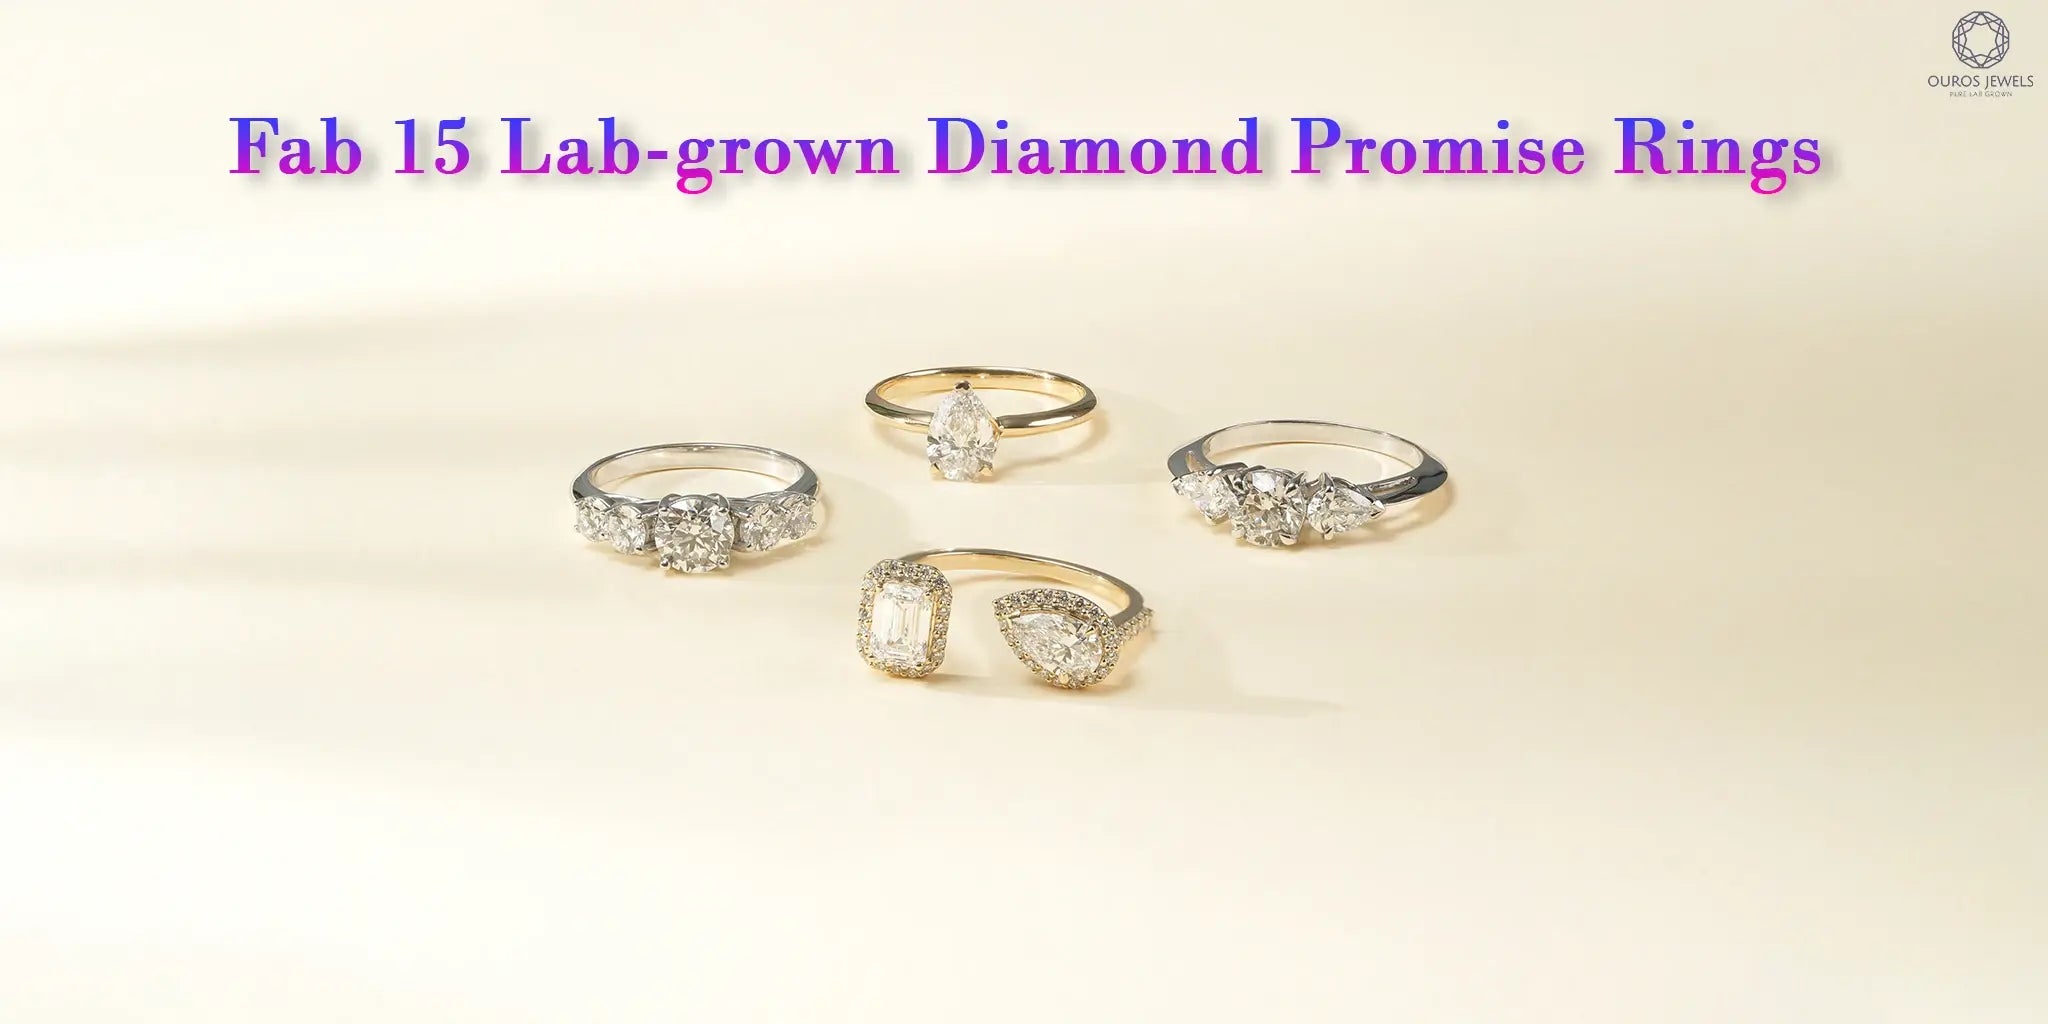 Fabulous Looking Top 15 Lab-grown Diamond Promise Rings — Ouros Jewels